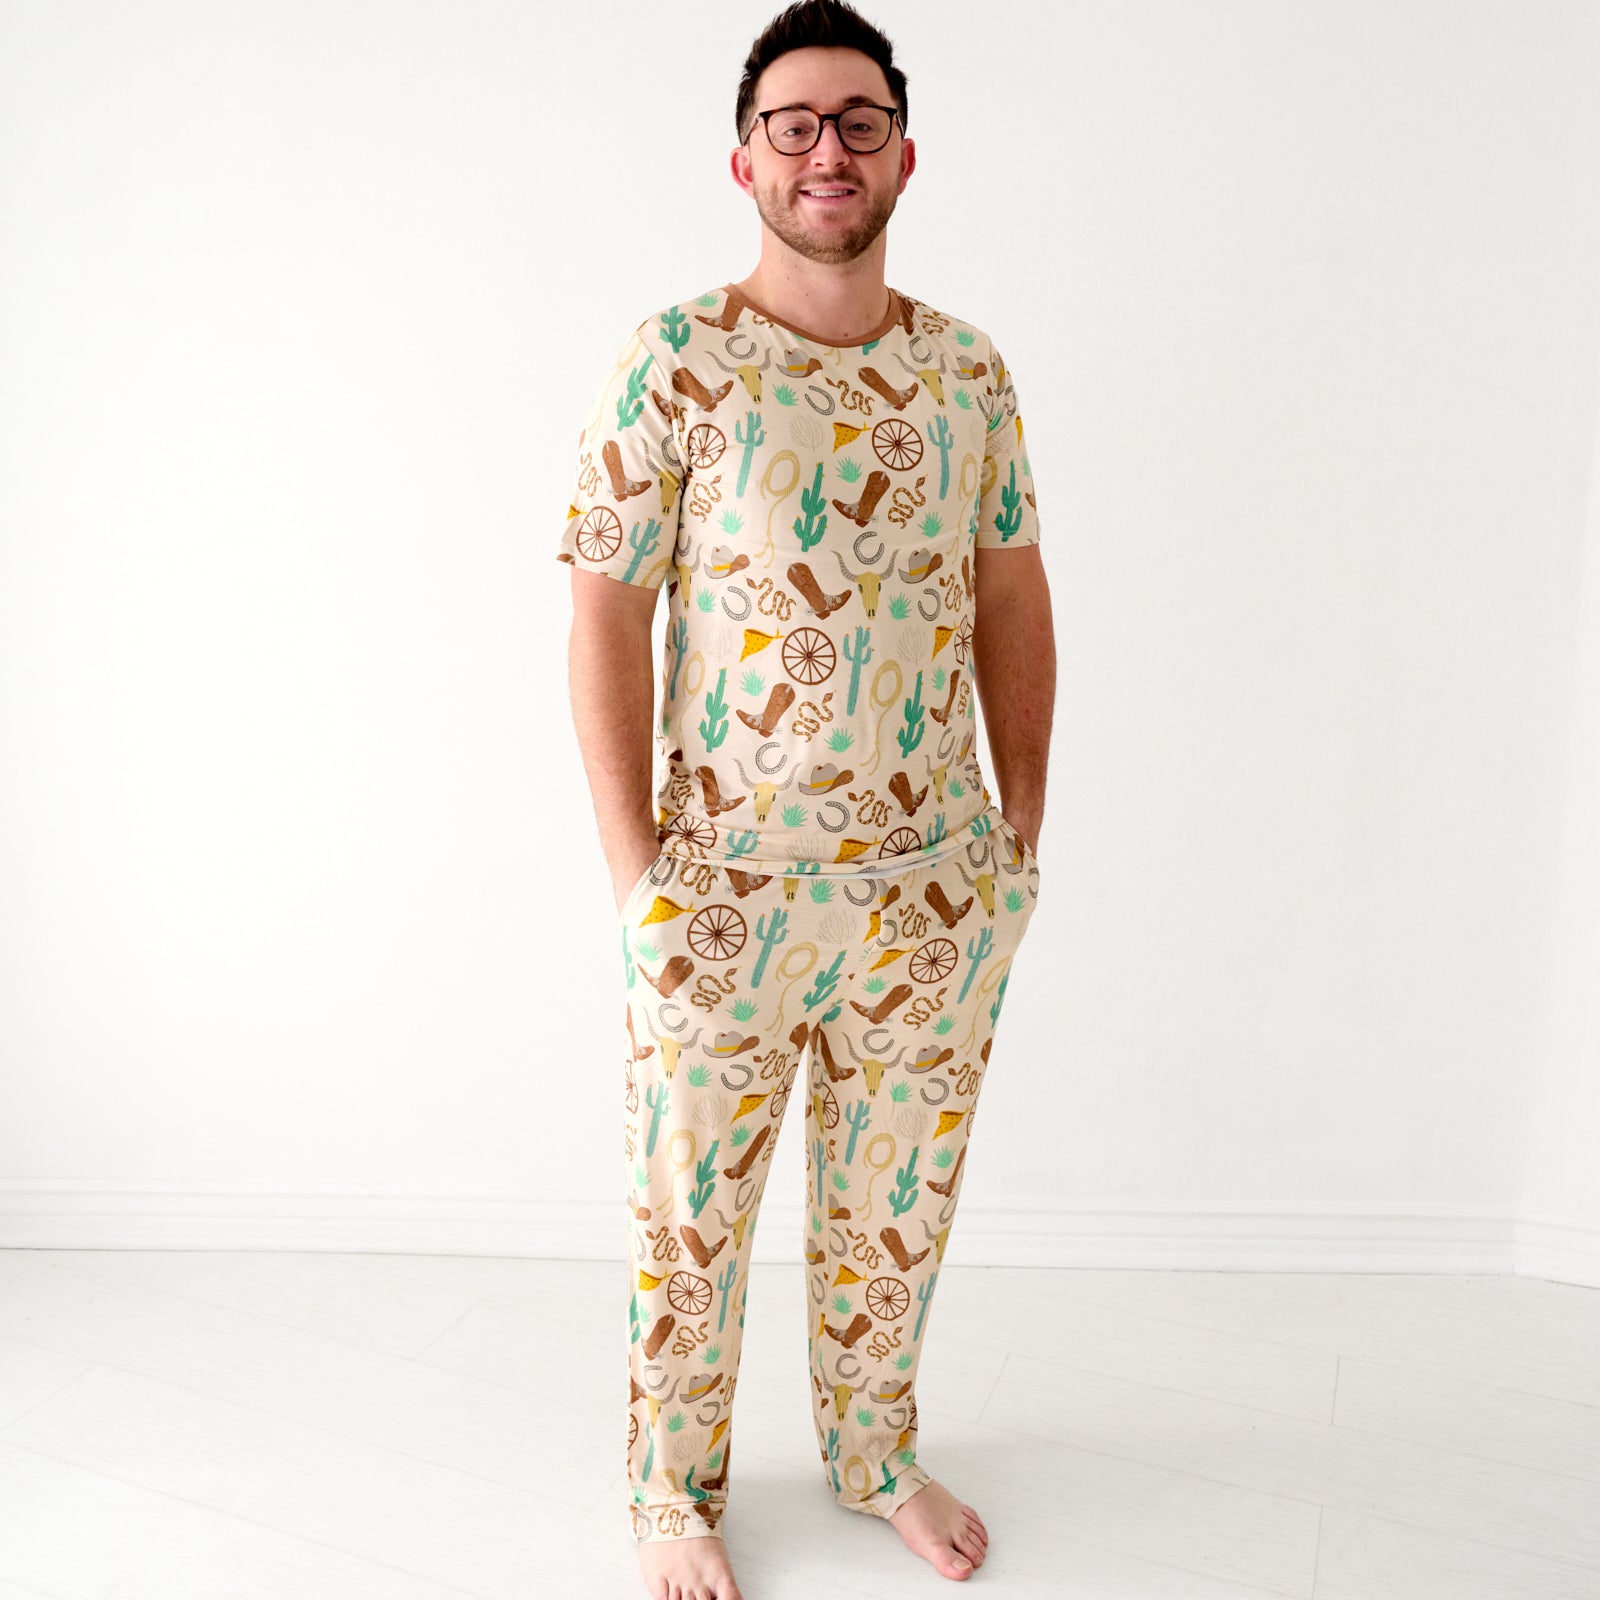 Image of a man wearing Caramel Ready to Rodeo men's pajama pants paired with a matching men's pajama top